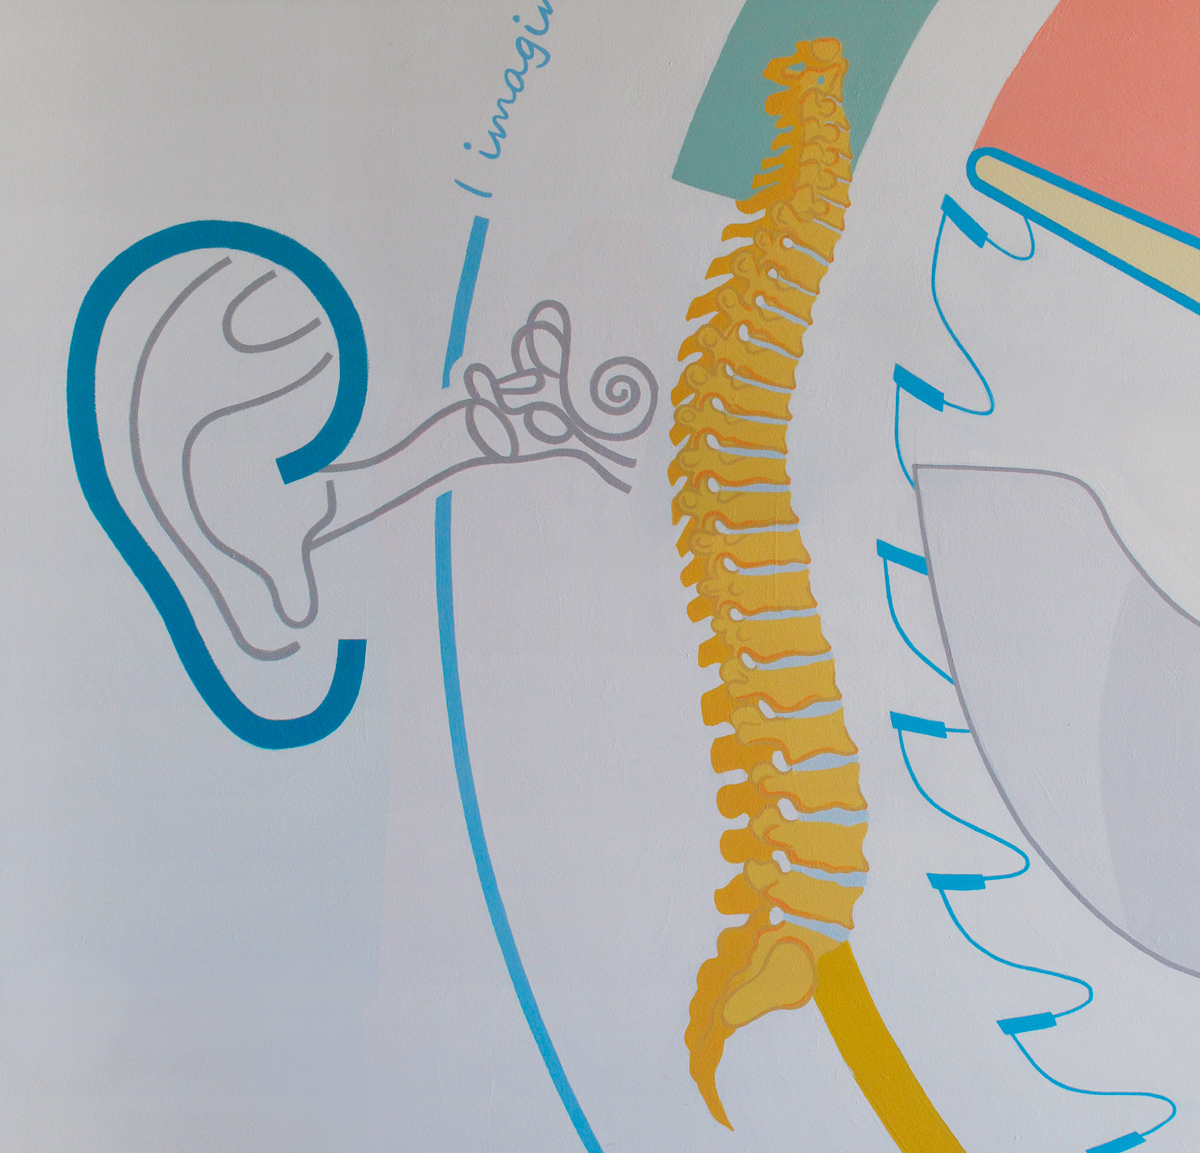 ear, spine, and blade detail in science and engineering mural